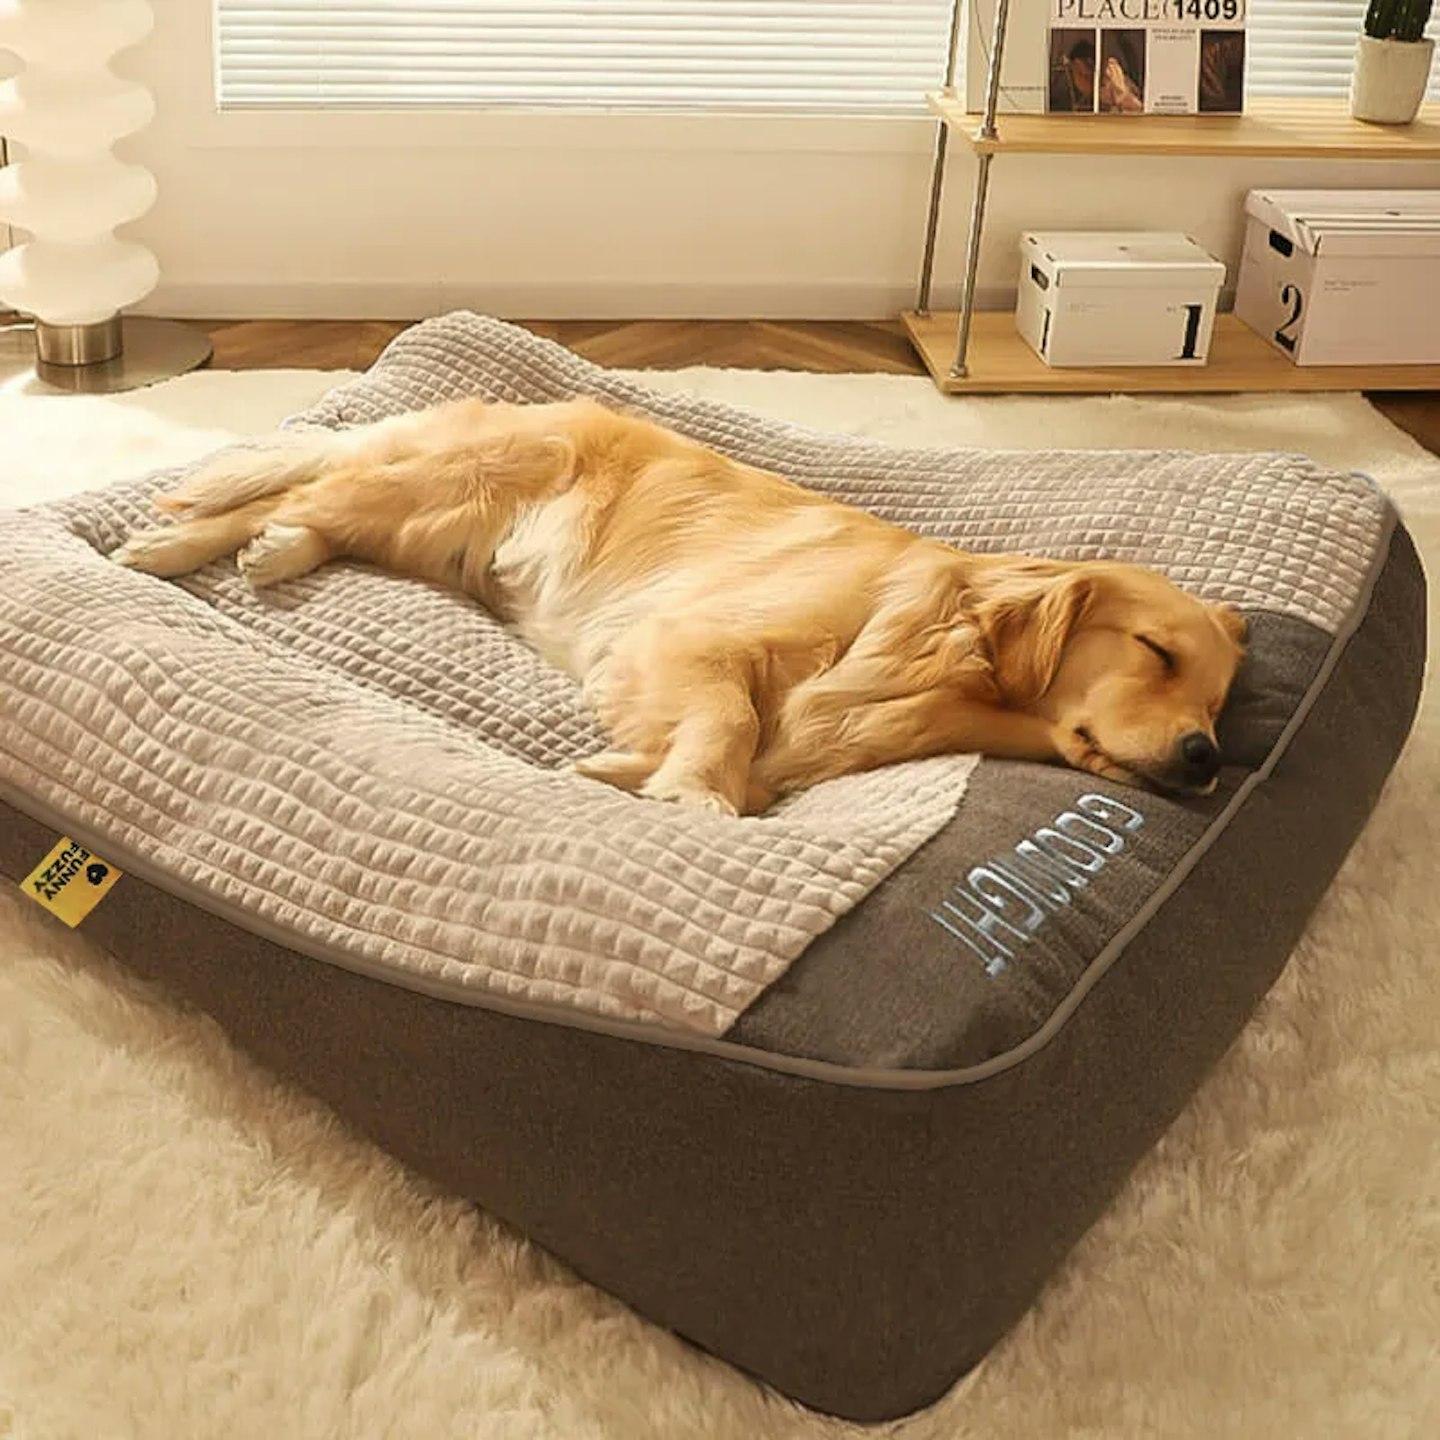 Best orthopaedic cushion bed for dogs